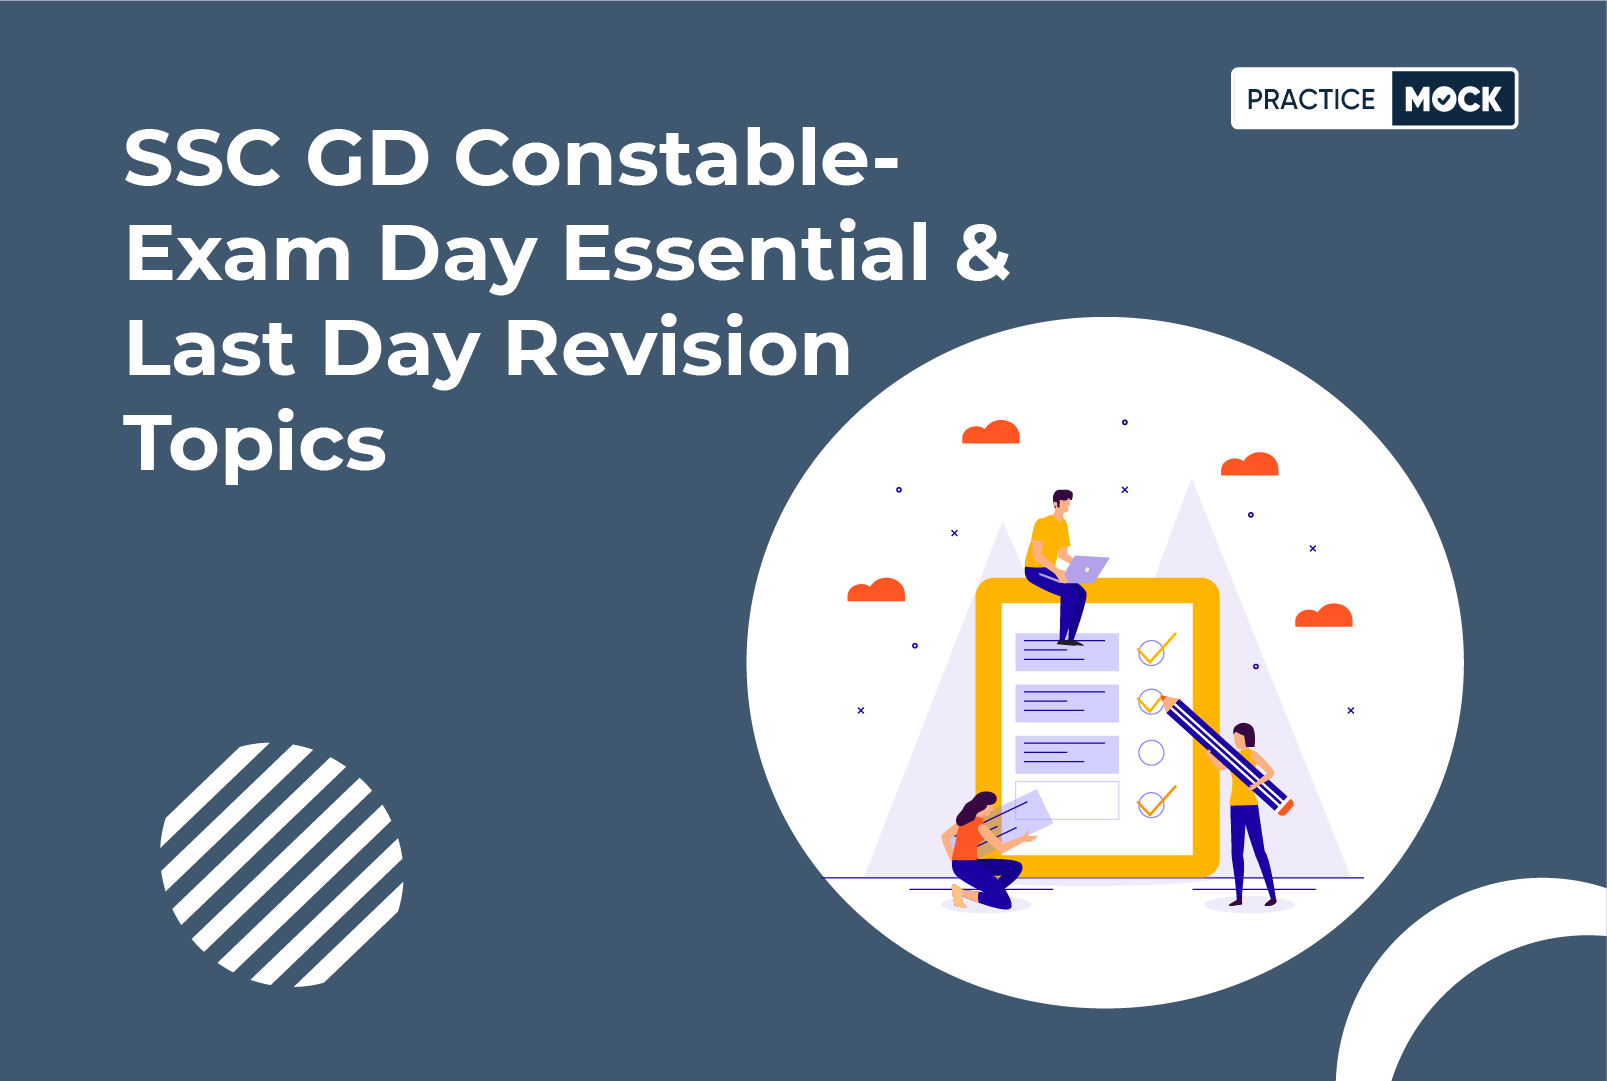 SSC GD Constable- Exam Day Essential & Last Day Revision Topics